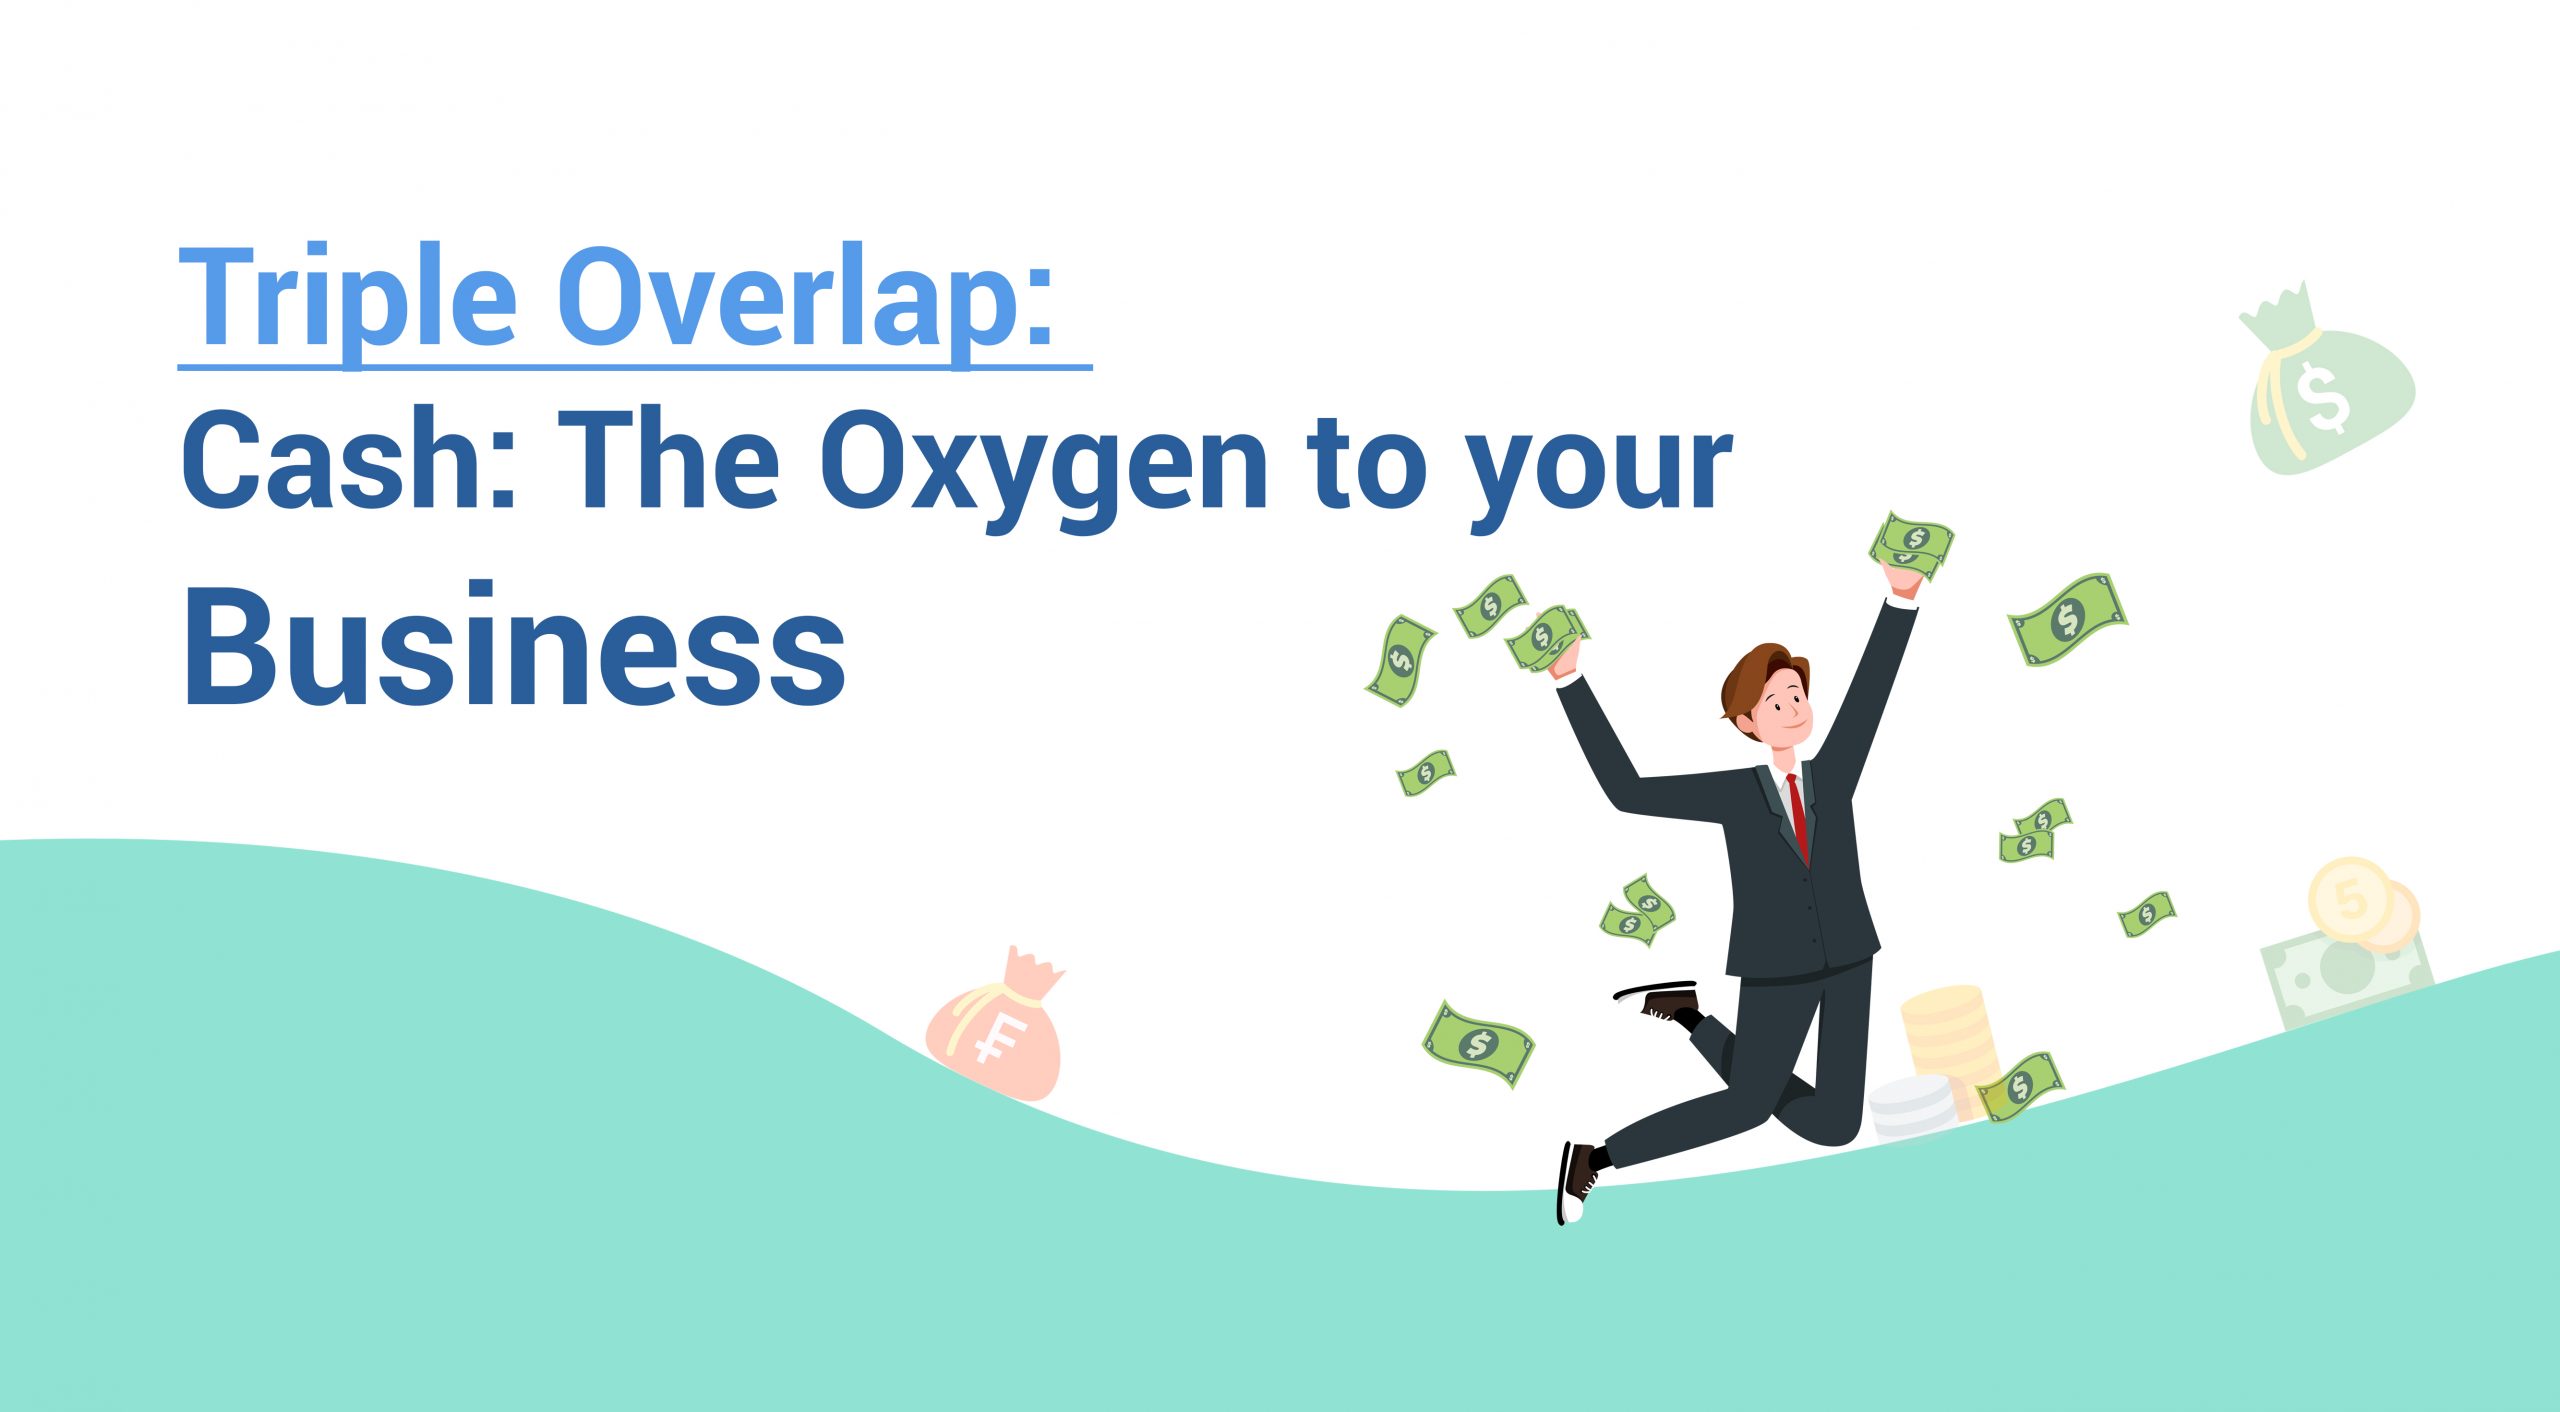 Triple Overlap: Cash: The Oxygen to your Business